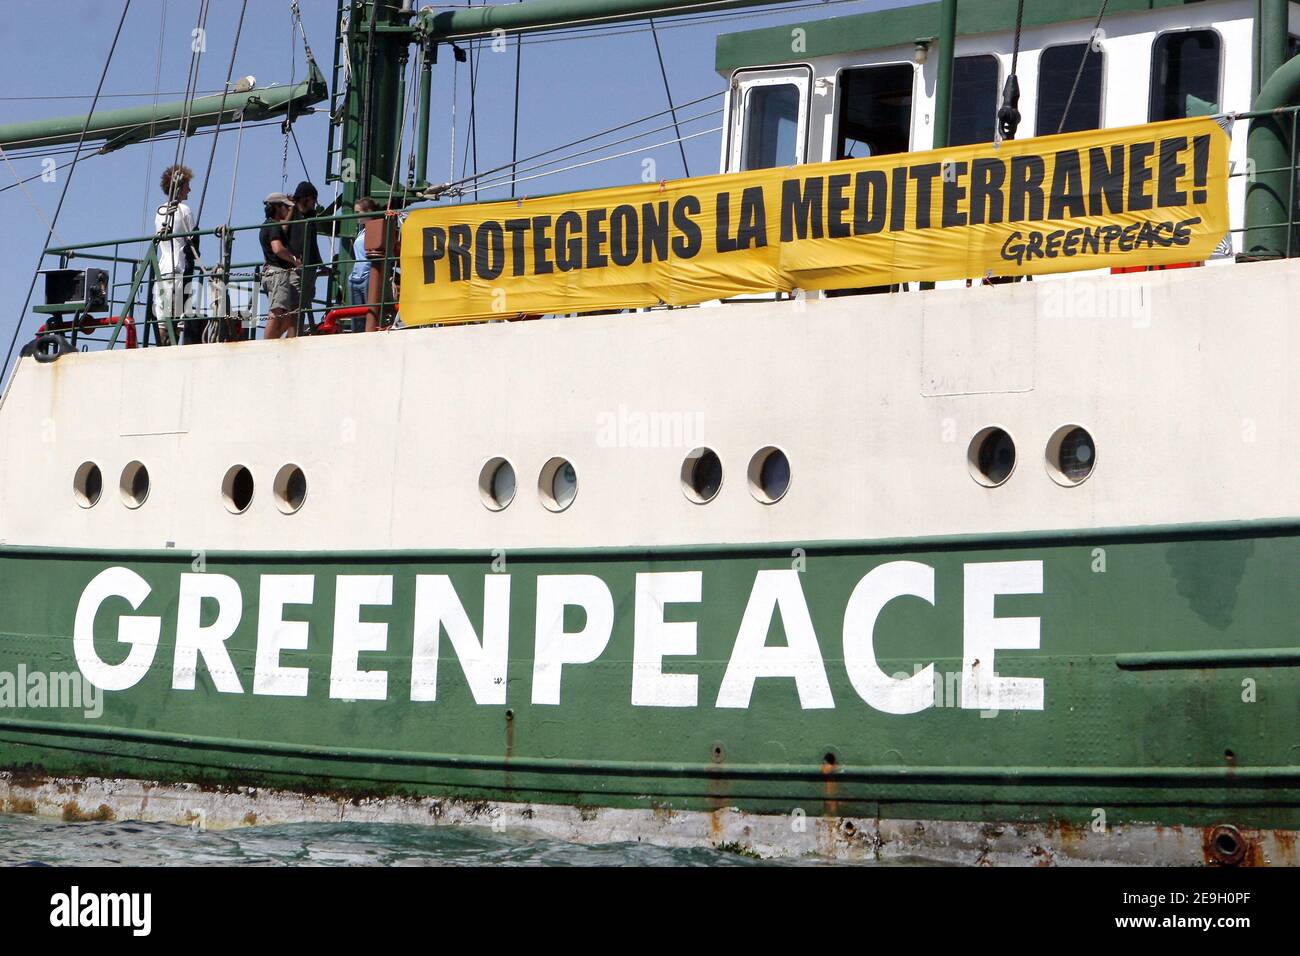 Greenpeace's Rainbow Warrior II is circled by tuna fishing vessels to prevent it from docking, as it tries to move into Marseille's harbour, August 23, 2006. Fishermen in the southern French port city of Marseille have used Greenpeace's own tactics against it to prevent the environmental activist group's flagship from docking.. Rainbow Warrior II campaigns to save dwindling red tuna stocks. Photo by Gerald Holubowicz/ABACAPRESS.COM Stock Photo